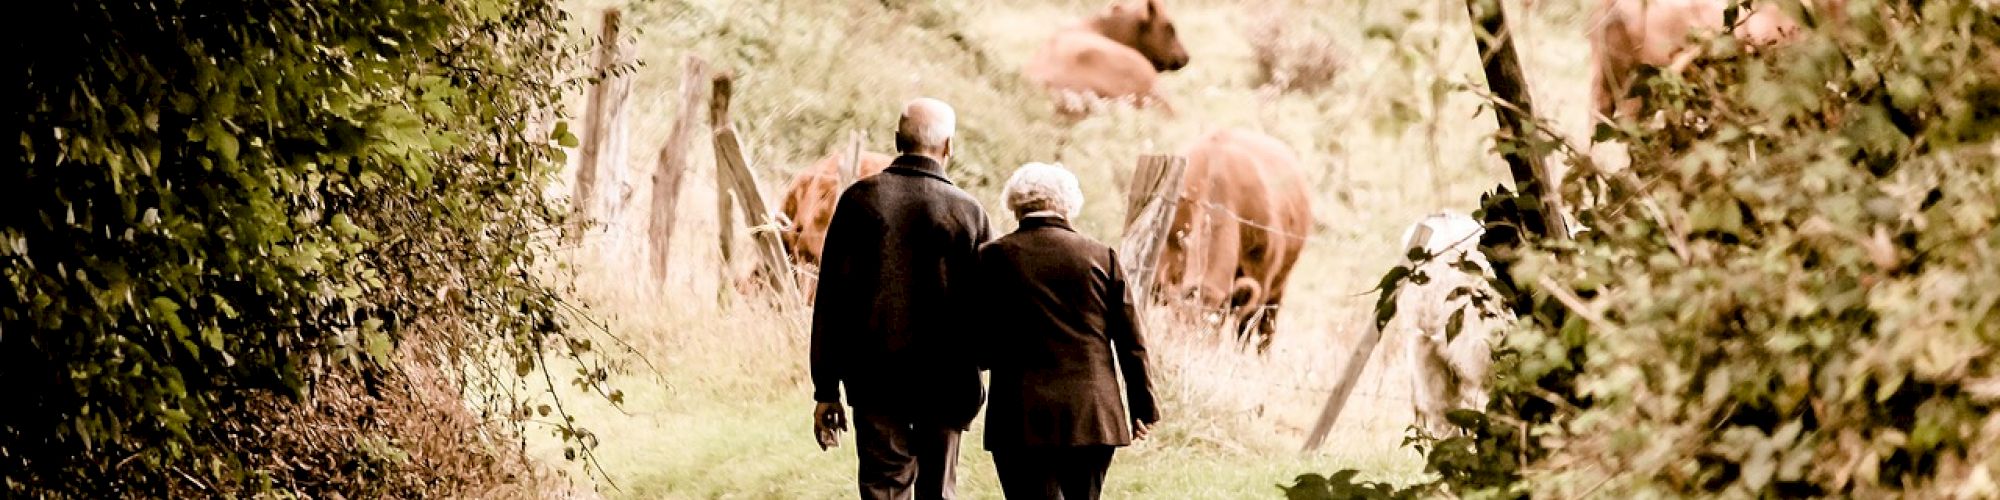 An elderly couple walks hand in hand down a wooded path, with cows grazing in the background.